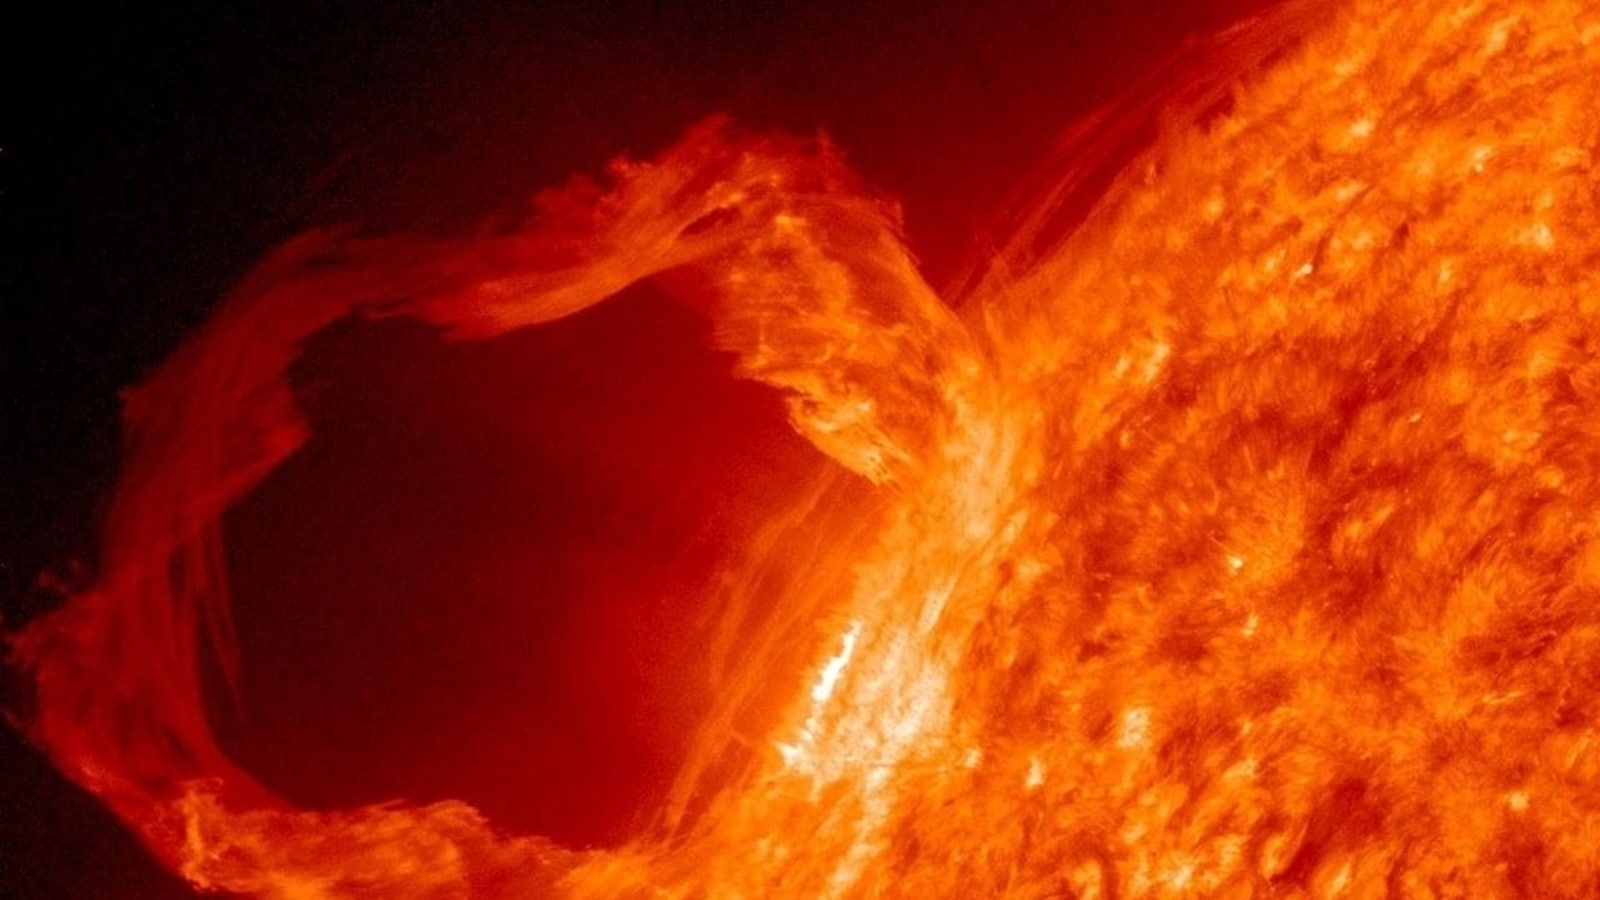 Solar storm alert: CME could hit Earth and spark a geomagnetic storm today, says NOAA